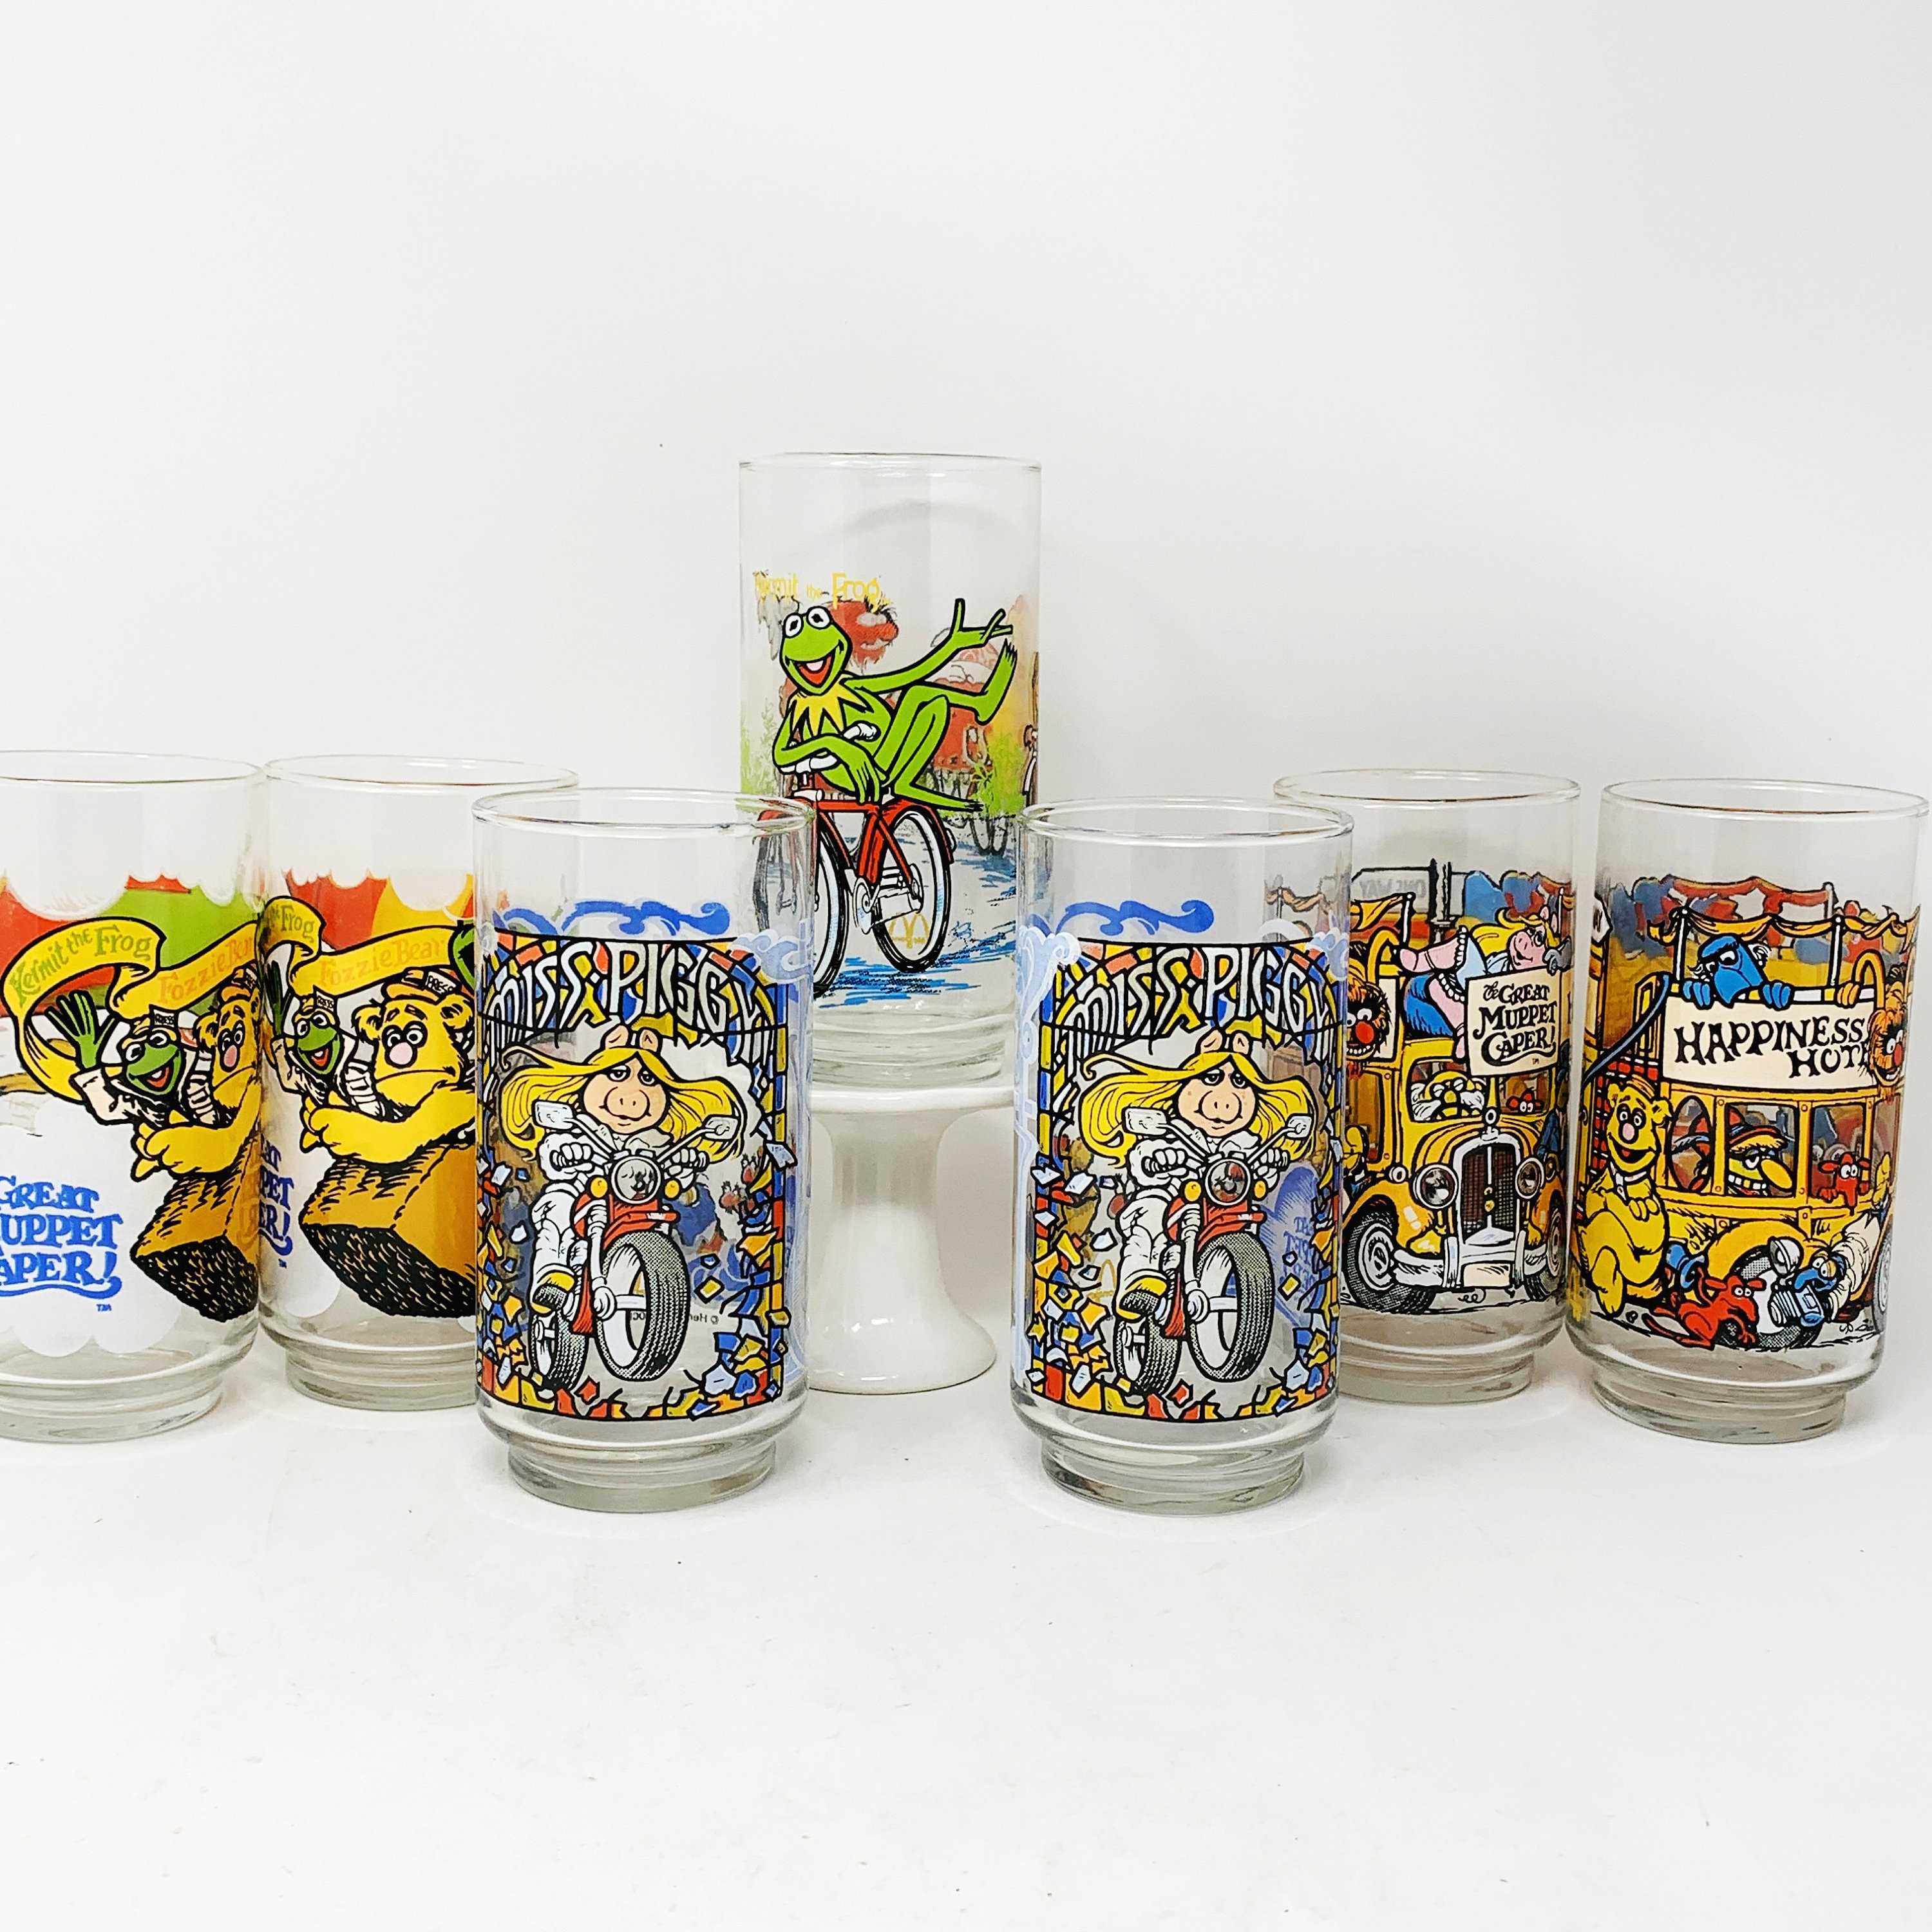 Details about   McDonalds The Great Muppet Caper 1981 Set of 4 Kermit the Frog Glasses 